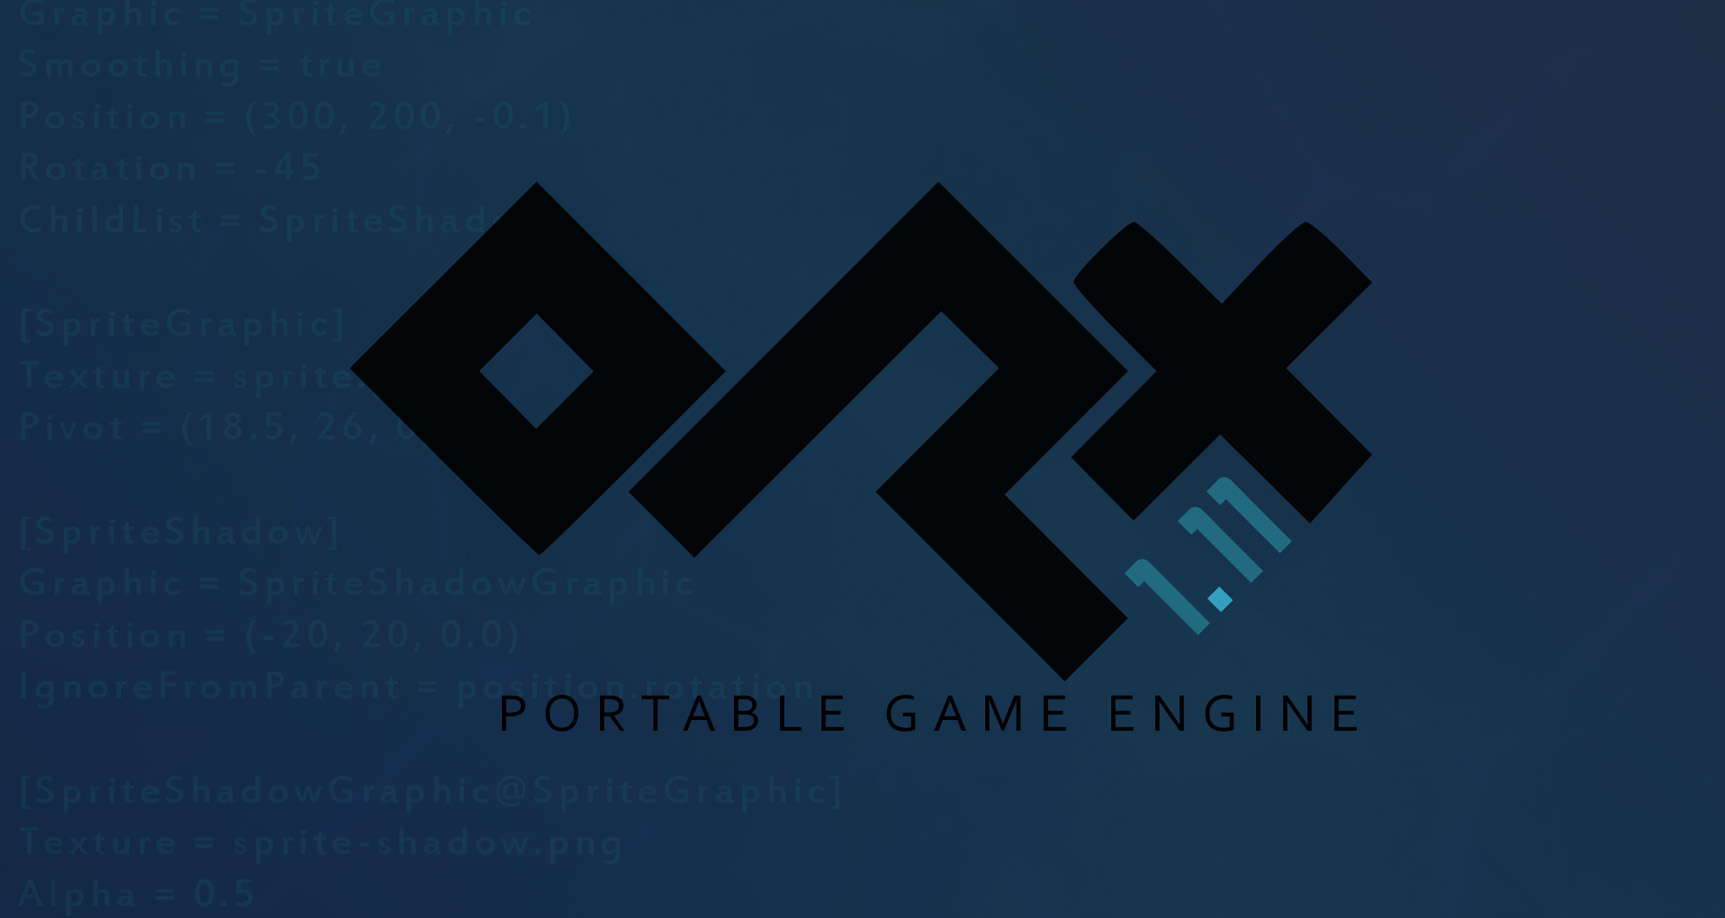 Orx - Portable Game Engine version 1.11 has been released